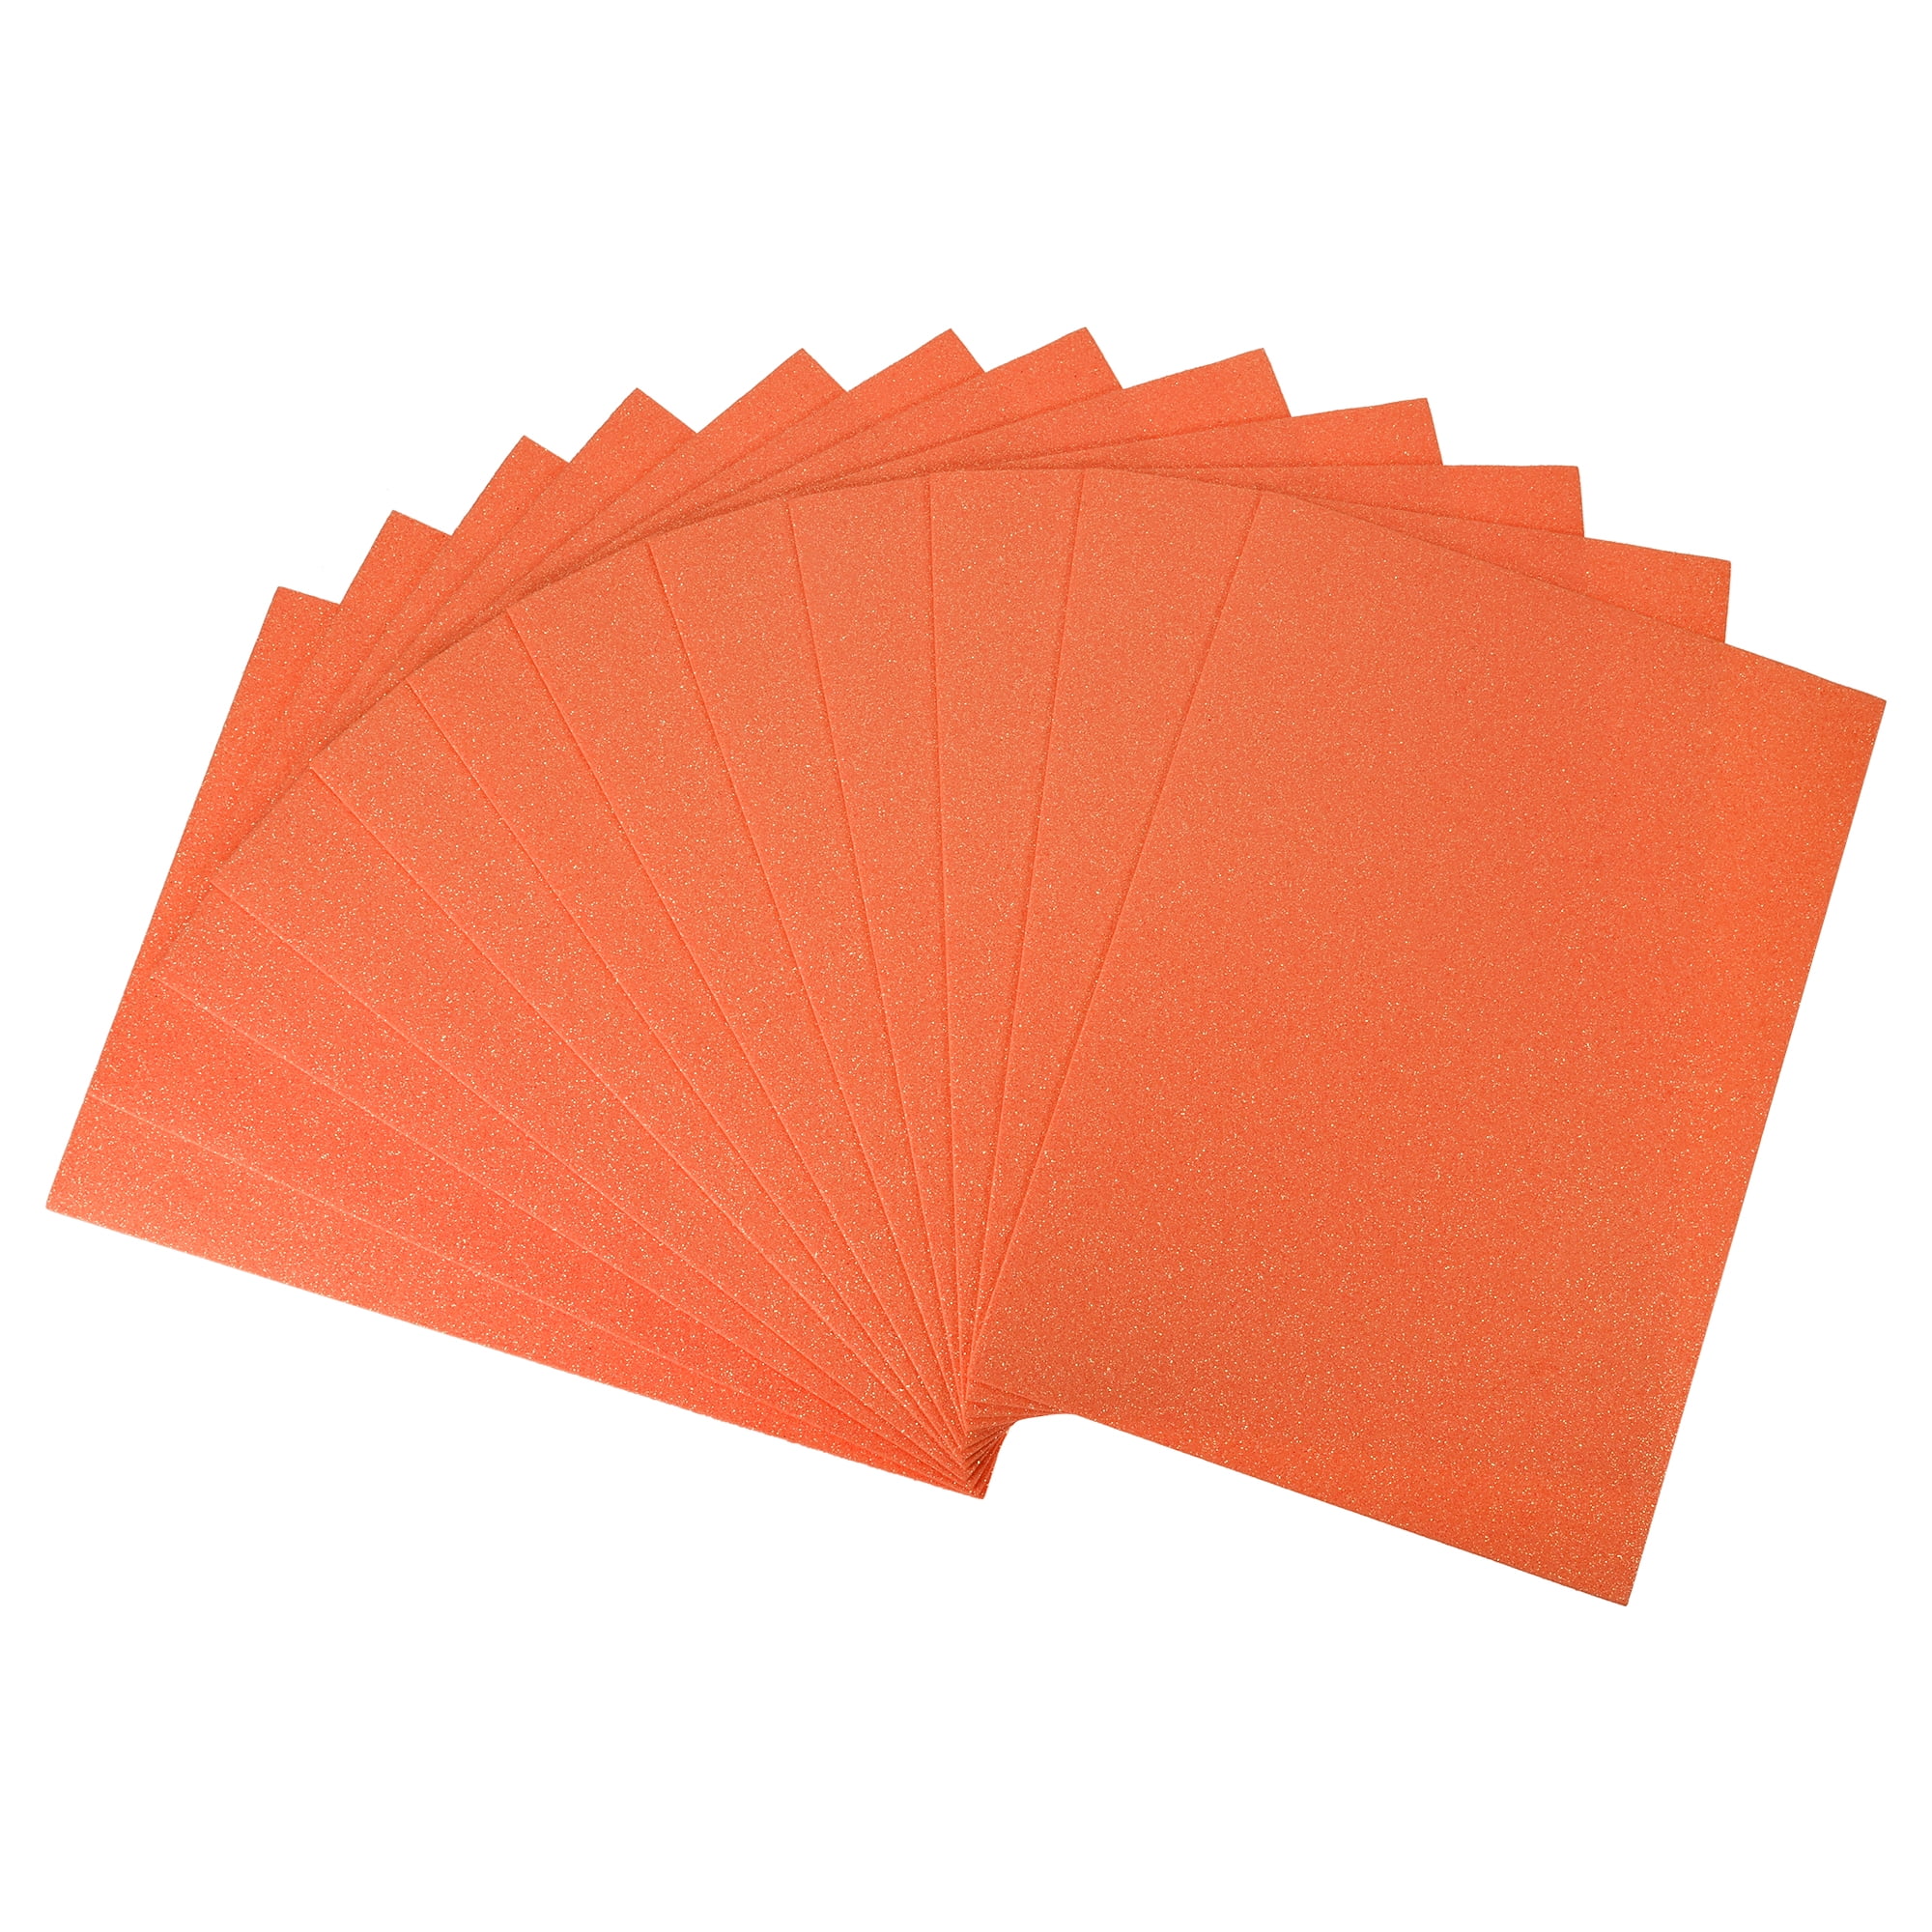  MECCANIXITY EVA Foam Sheets Orange 17.72 x 11.81 Inch 2mm  Thickness for Crafts DIY Projects, 6 Pcs : Arts, Crafts & Sewing